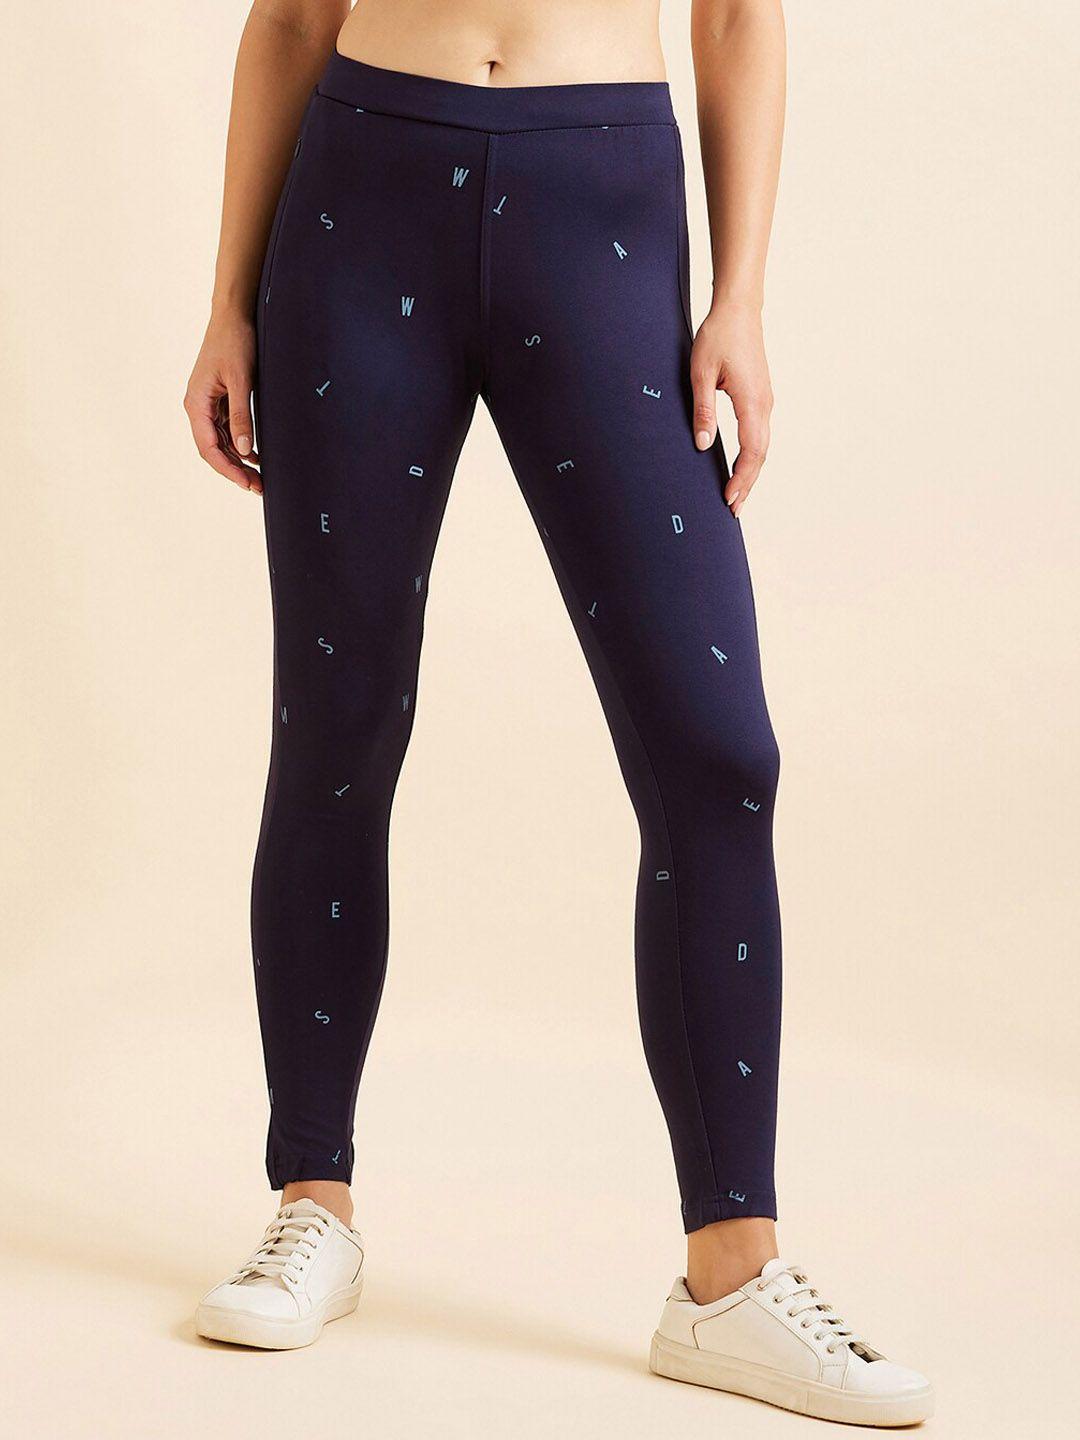 sweet dreams navy blue printed ankle-length tights